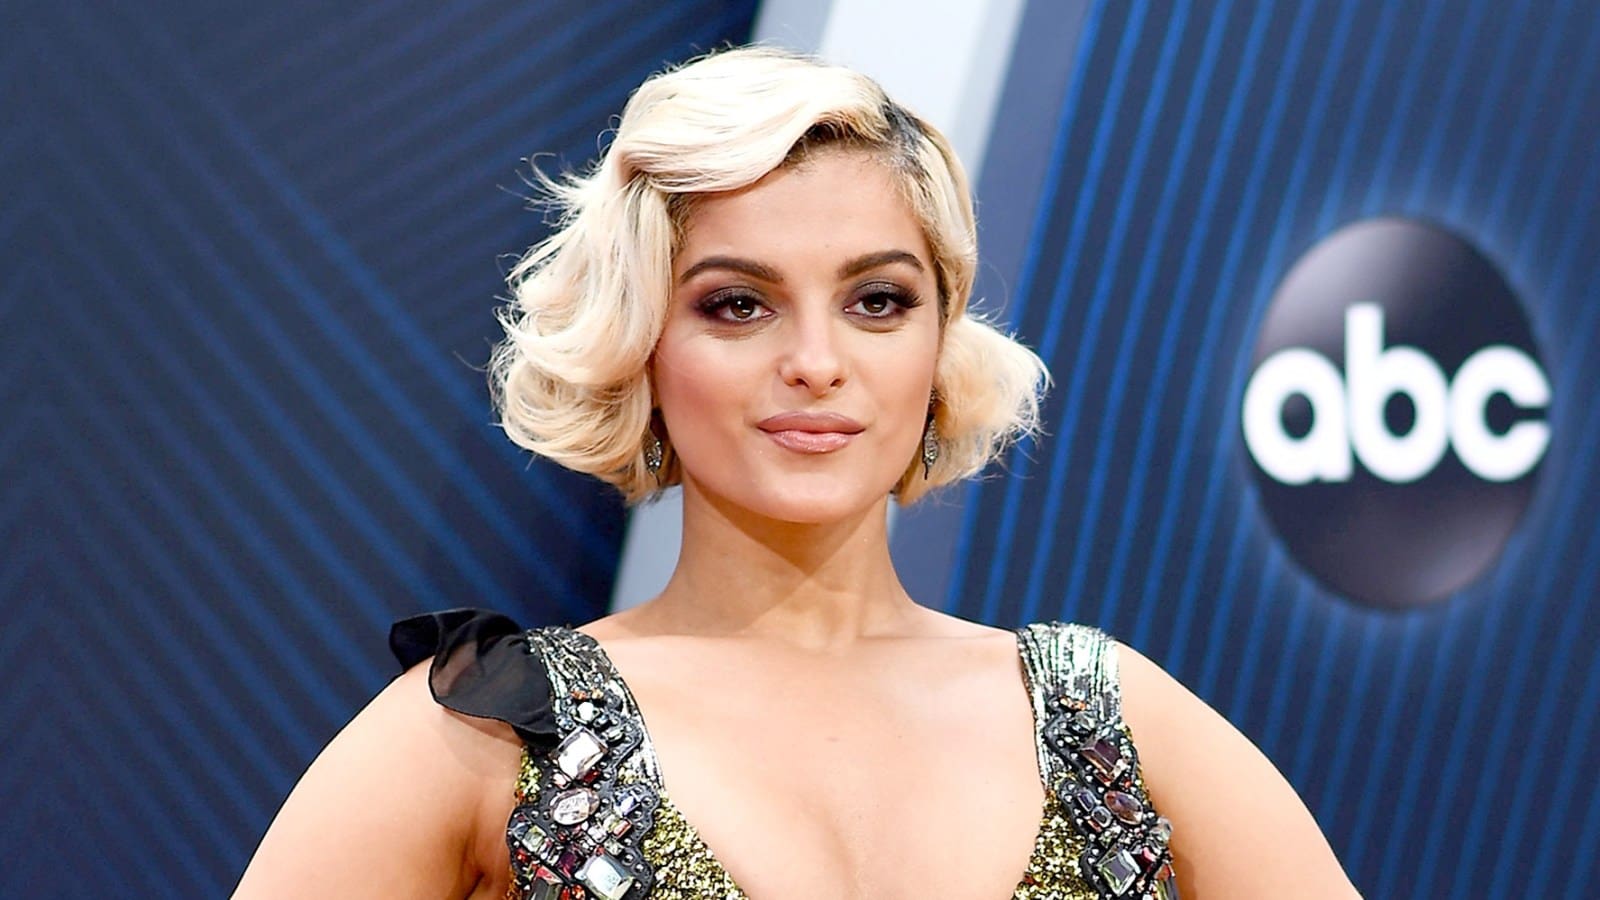 ”bebe-rexha-confesses-she-and-her-dad-are-no-longer-on-speaking-terms-after-he-dragged-her-for-her-provocative-posts”